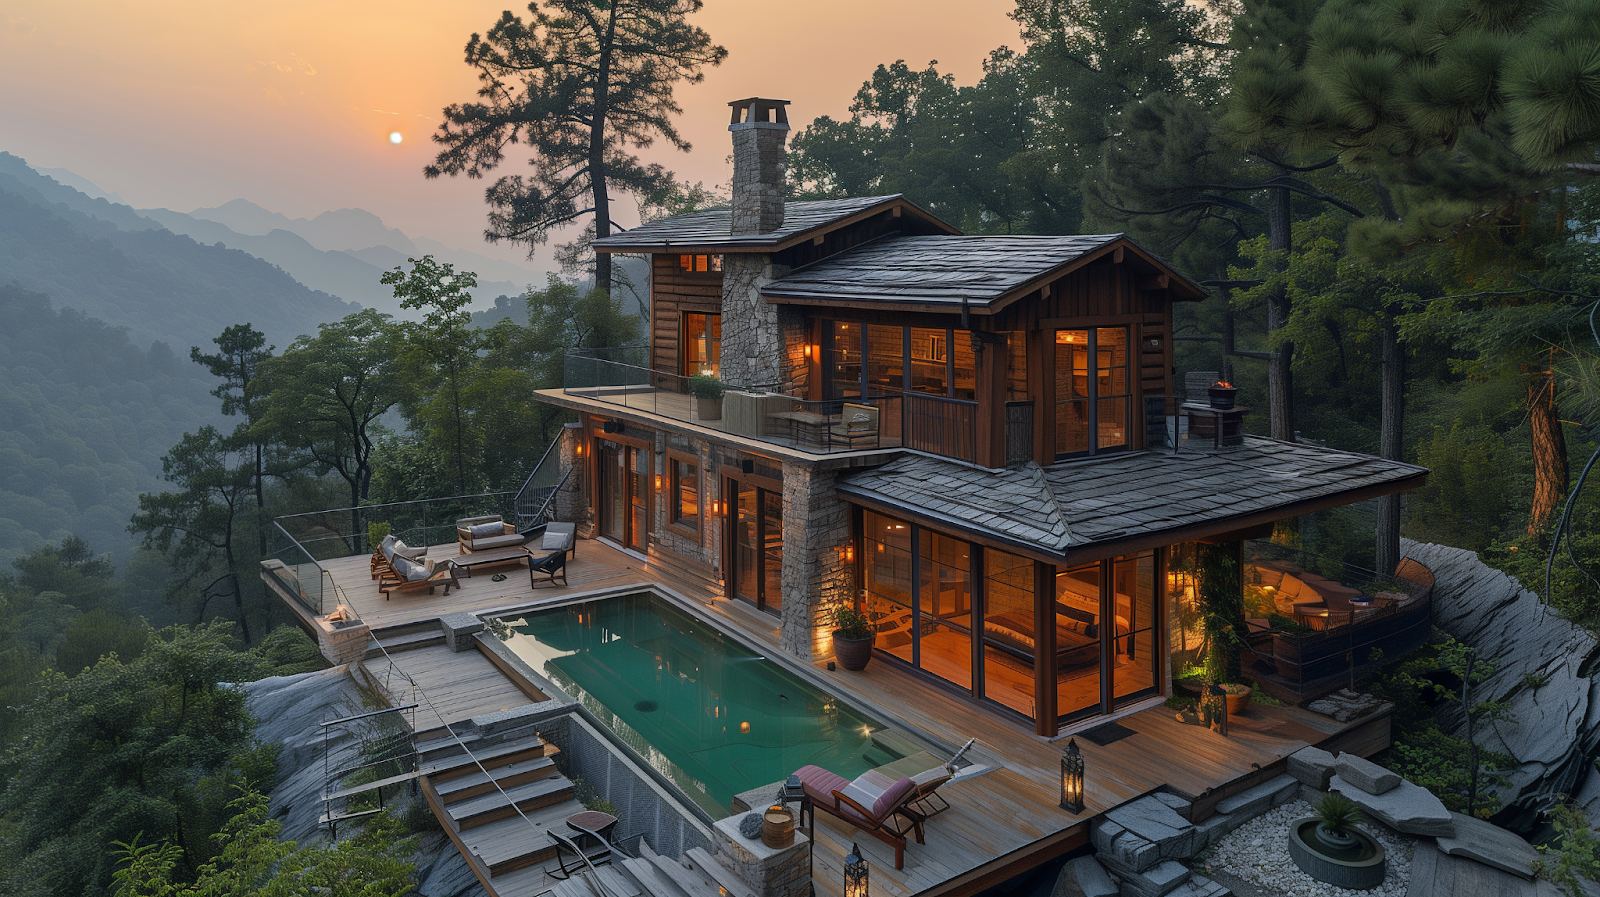 An exclusive off-the-grid luxury retreat in the mountains where one can unwind and relax